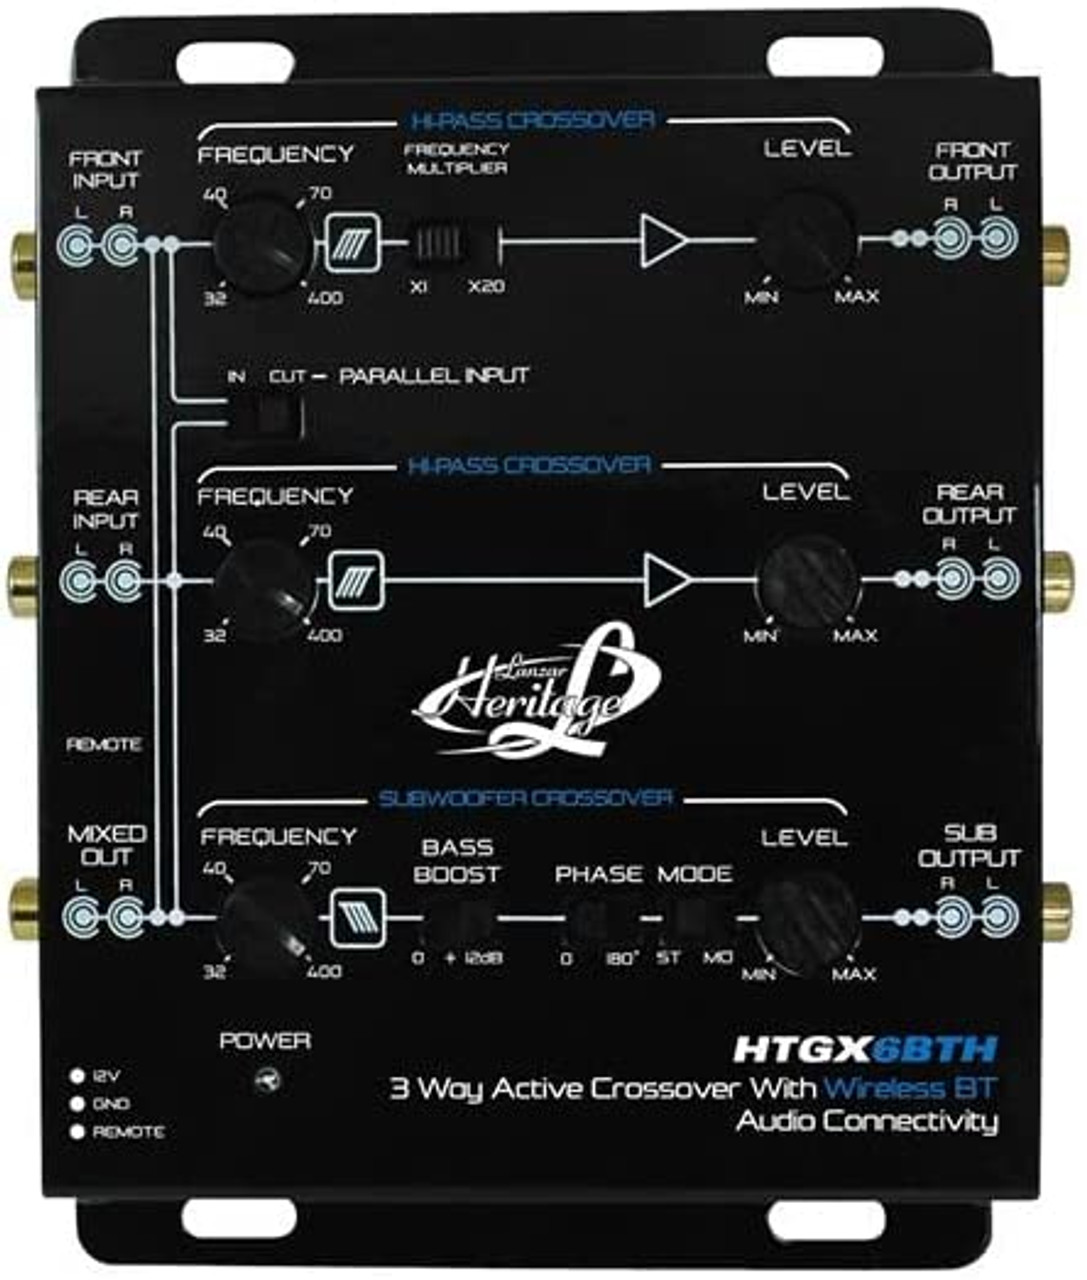 3 Way Active Crossover With Bluetooth Wireless Audio Connectivity